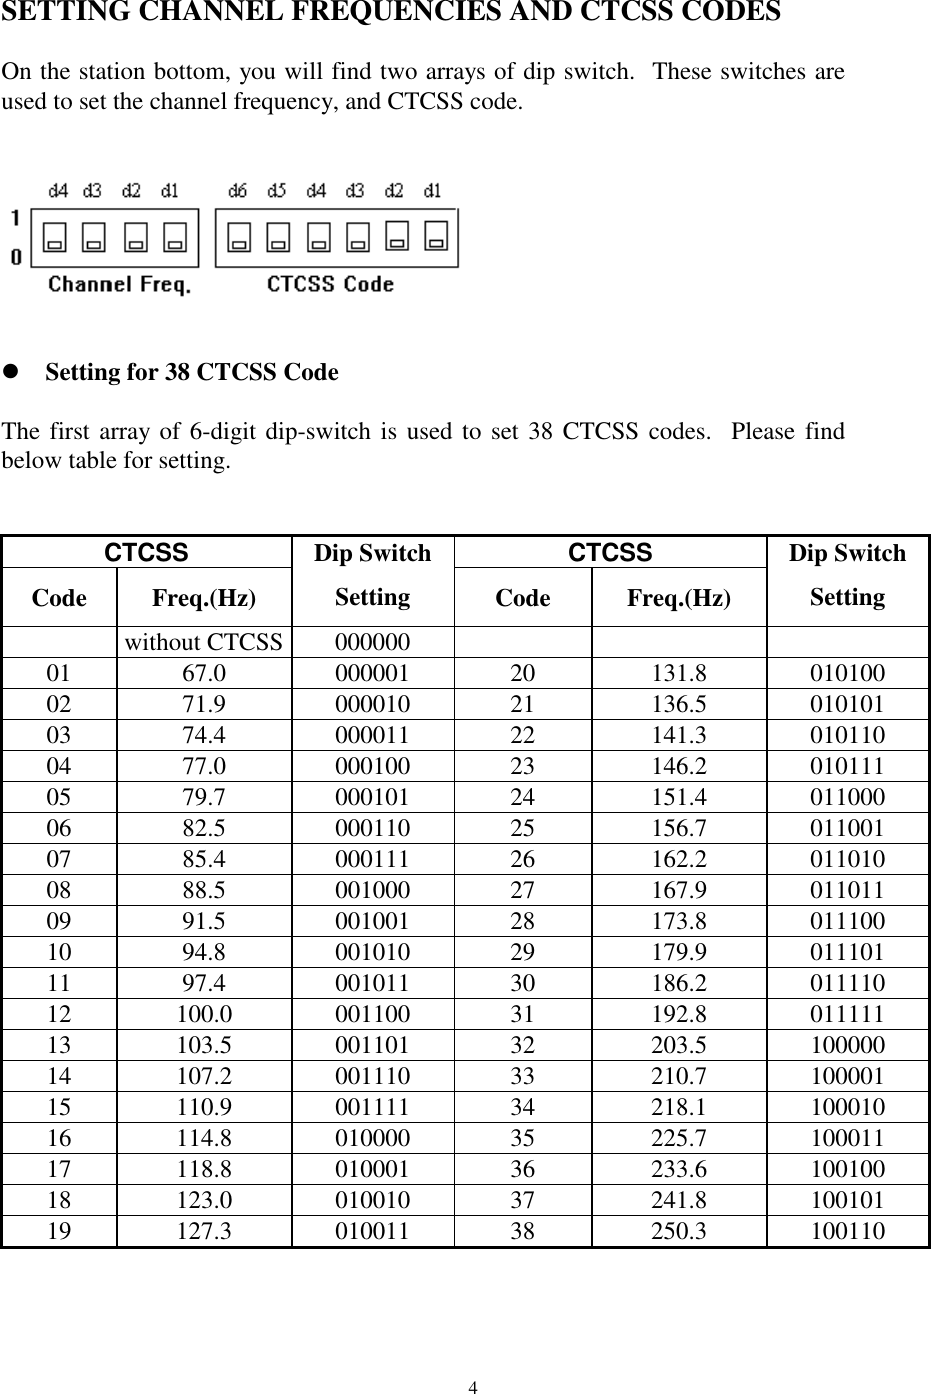 4SETTING CHANNEL FREQUENCIES AND CTCSS CODESOn the station bottom, you will find two arrays of dip switch.  These switches areused to set the channel frequency, and CTCSS code. Setting for 38 CTCSS CodeThe first array of 6-digit dip-switch is used to set 38 CTCSS codes.  Please findbelow table for setting.CTCSS CTCSSCode Freq.(Hz)Dip SwitchSetting Code Freq.(Hz)Dip SwitchSettingwithout CTCSS 00000001 67.0 000001 20 131.8 01010002 71.9 000010 21 136.5 01010103 74.4 000011 22 141.3 01011004 77.0 000100 23 146.2 01011105 79.7 000101 24 151.4 01100006 82.5 000110 25 156.7 01100107 85.4 000111 26 162.2 01101008 88.5 001000 27 167.9 01101109 91.5 001001 28 173.8 01110010 94.8 001010 29 179.9 01110111 97.4 001011 30 186.2 01111012 100.0 001100 31 192.8 01111113 103.5 001101 32 203.5 10000014 107.2 001110 33 210.7 10000115 110.9 001111 34 218.1 10001016 114.8 010000 35 225.7 10001117 118.8 010001 36 233.6 10010018 123.0 010010 37 241.8 10010119 127.3 010011 38 250.3 100110